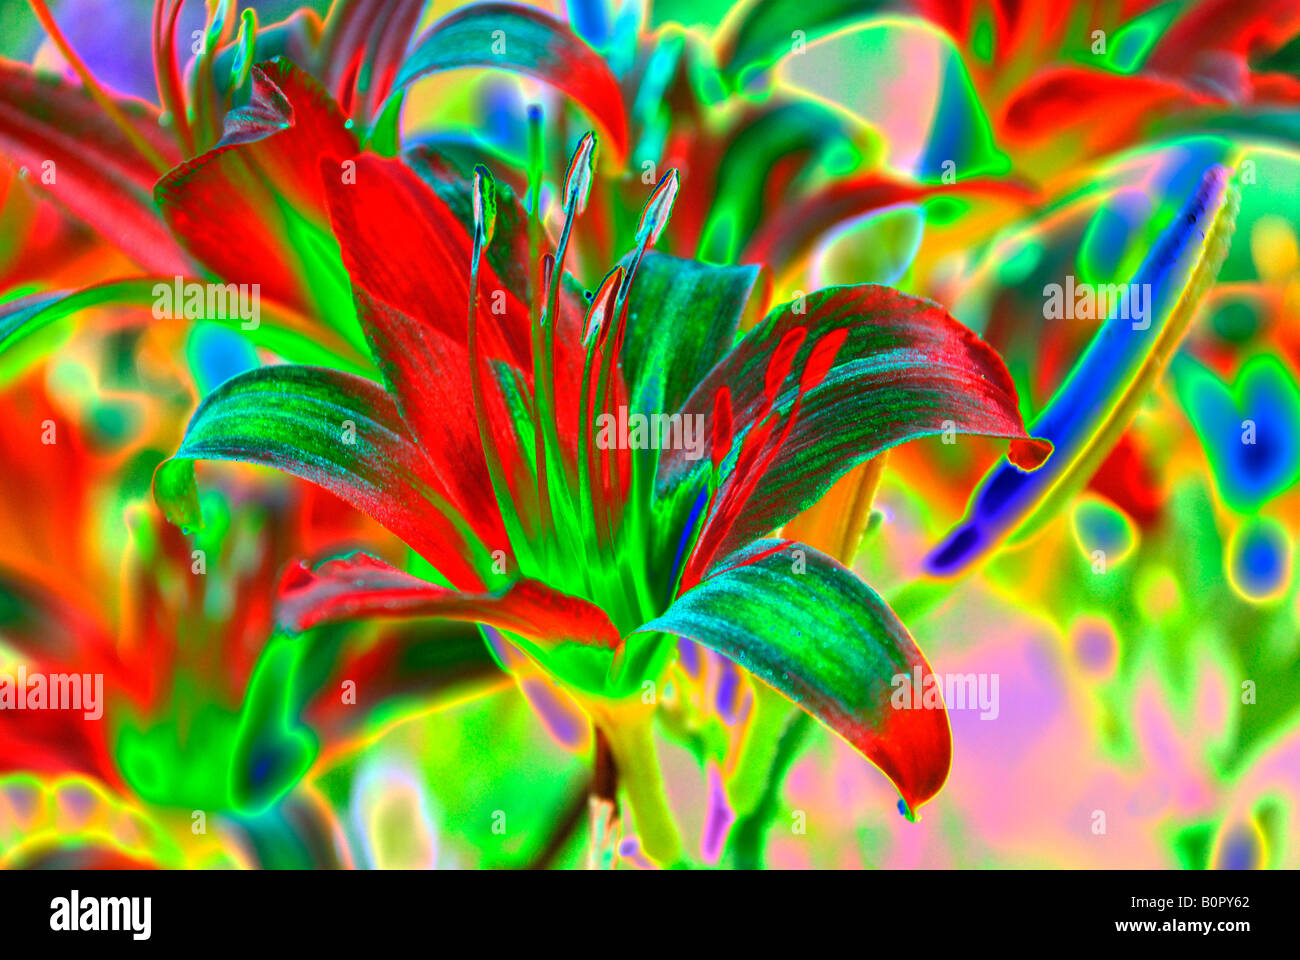 colourful flower image abstract Stock Photo